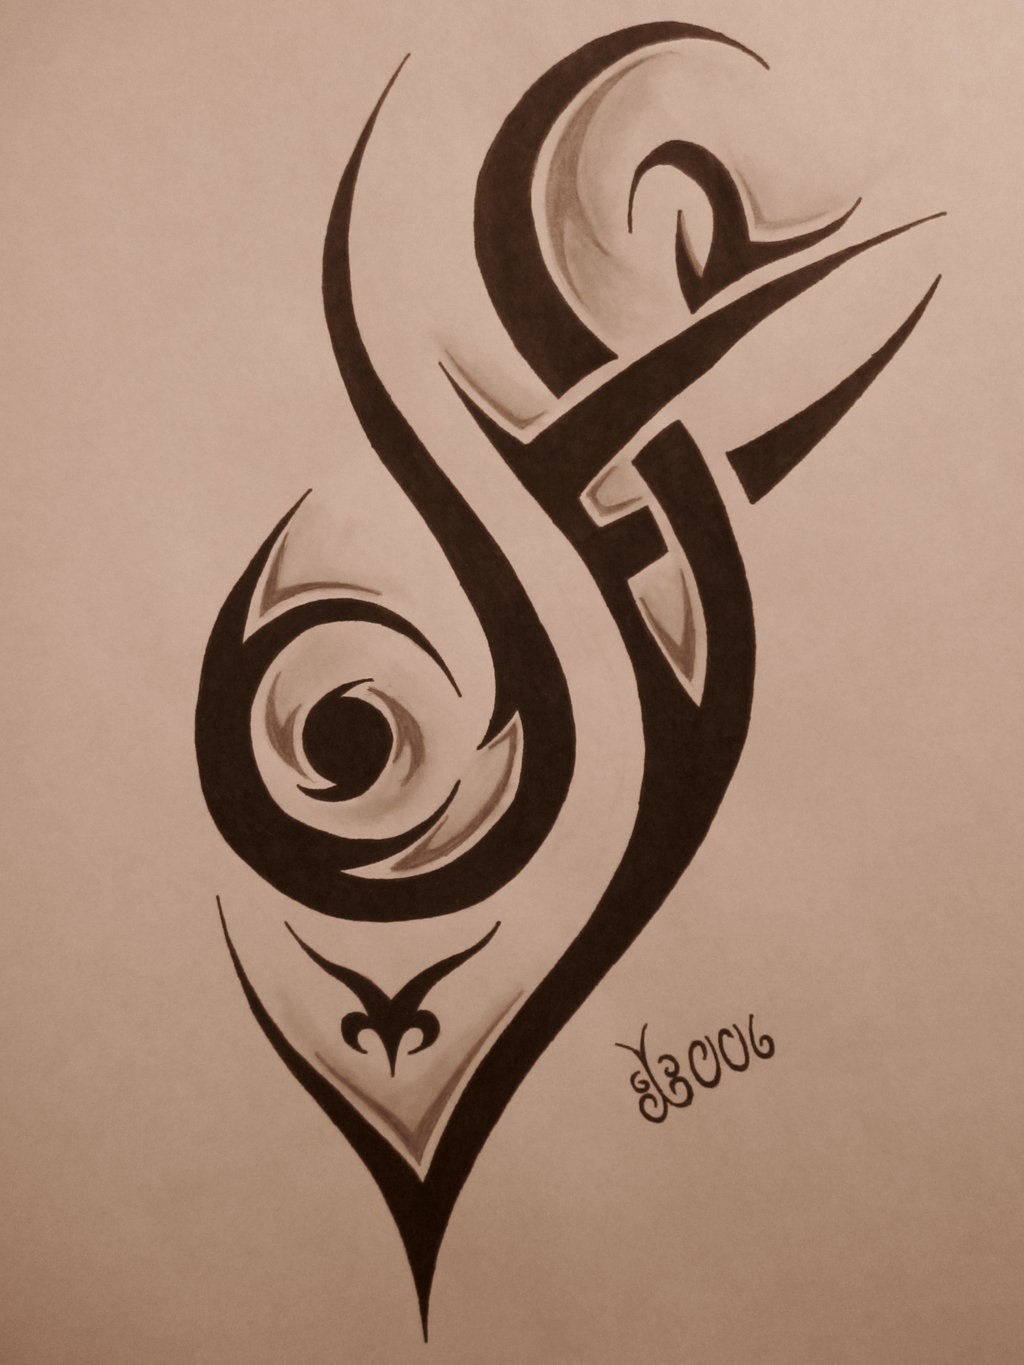 Tribal Tattoo Design Ideas Vol 2:Amazon.com:Appstore for Android